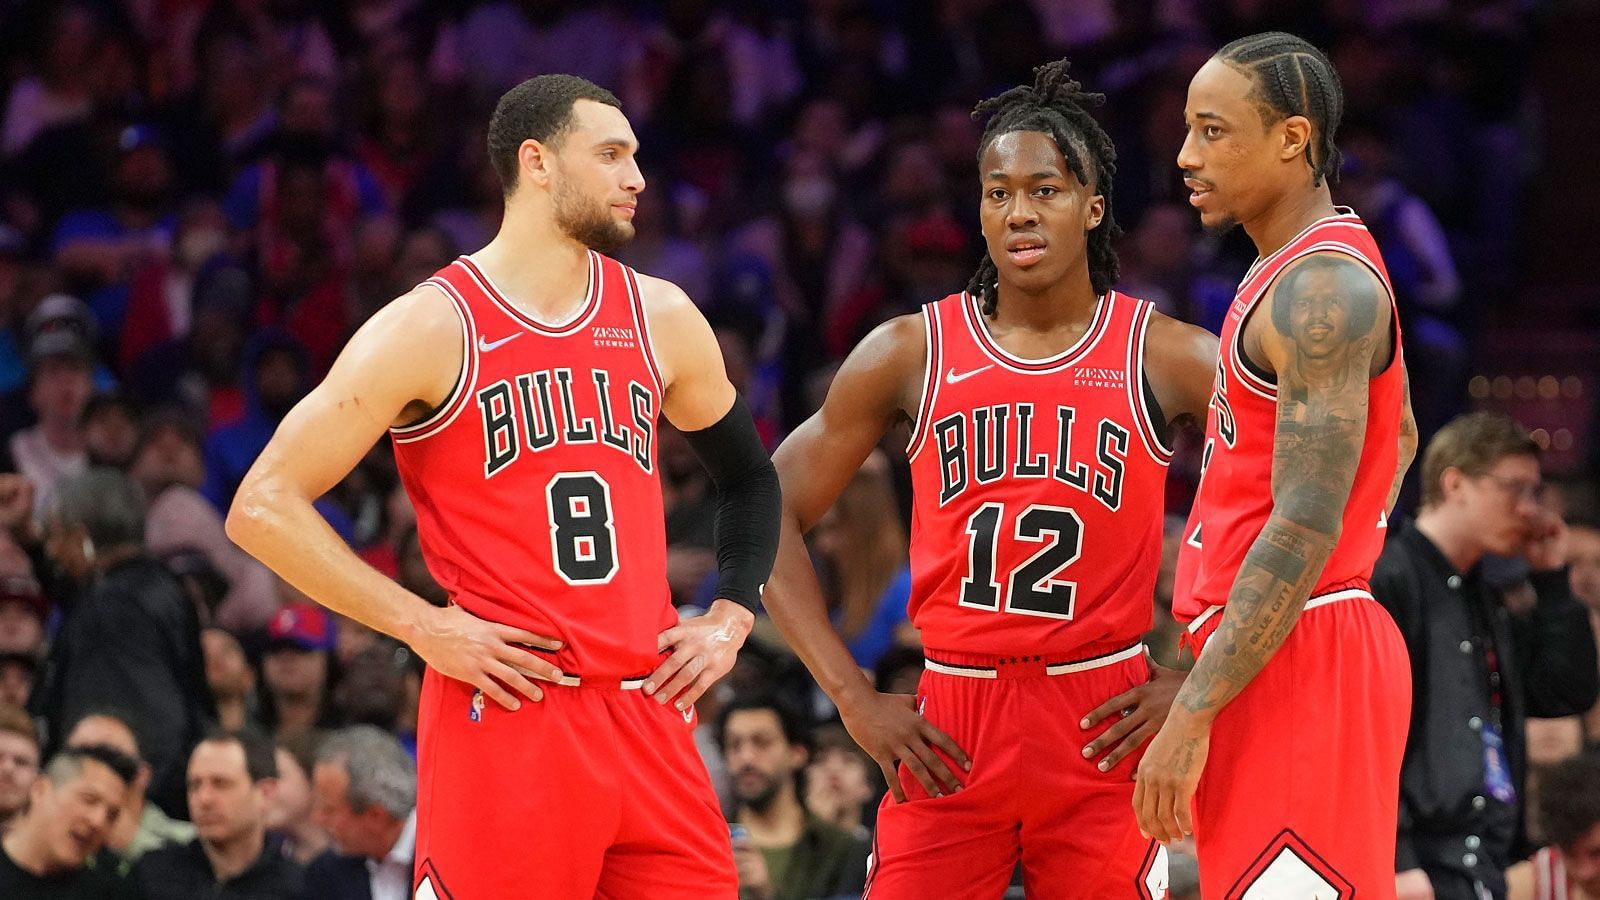 The slumping Chicago Bulls need to get back their groove on offense. [Photo: NBA.com]